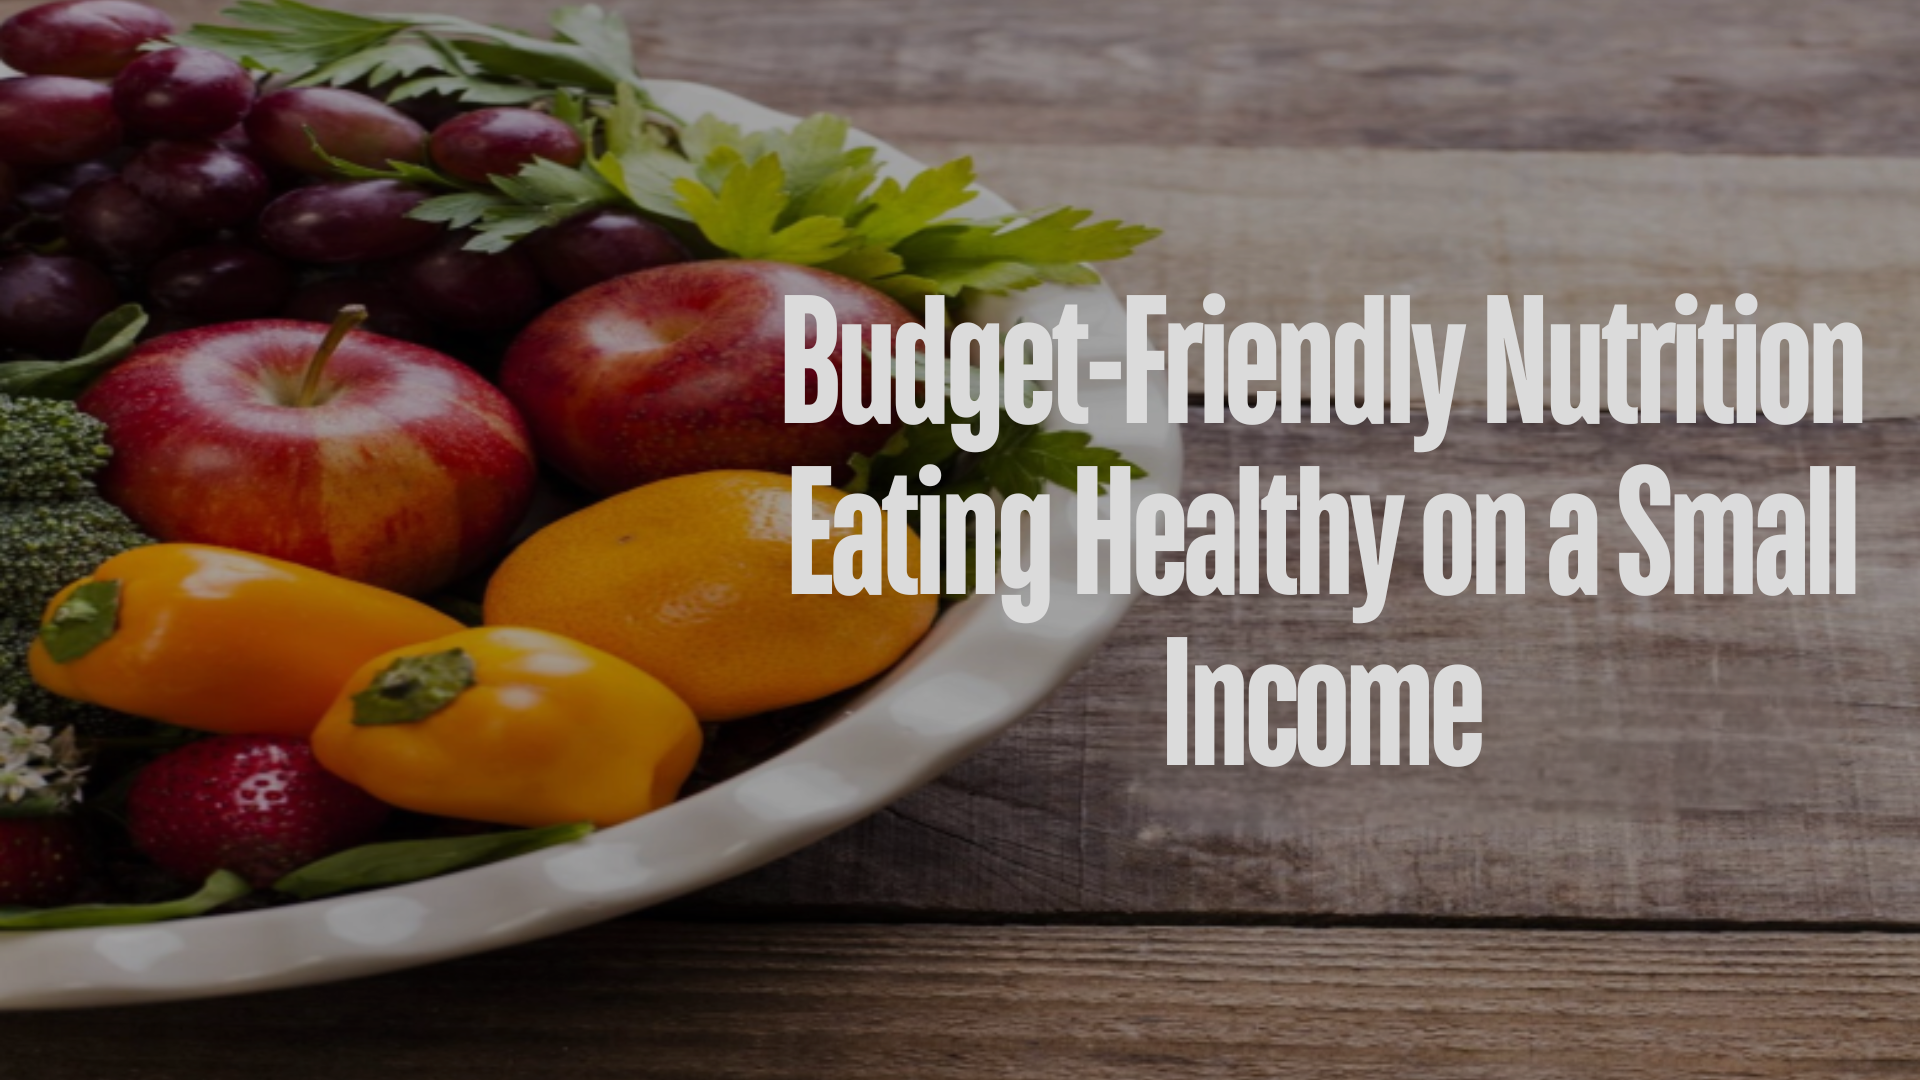 Learn how to achieve budget-friendly nutrition with practical tips on meal planning, smart shopping, and reducing food waste.